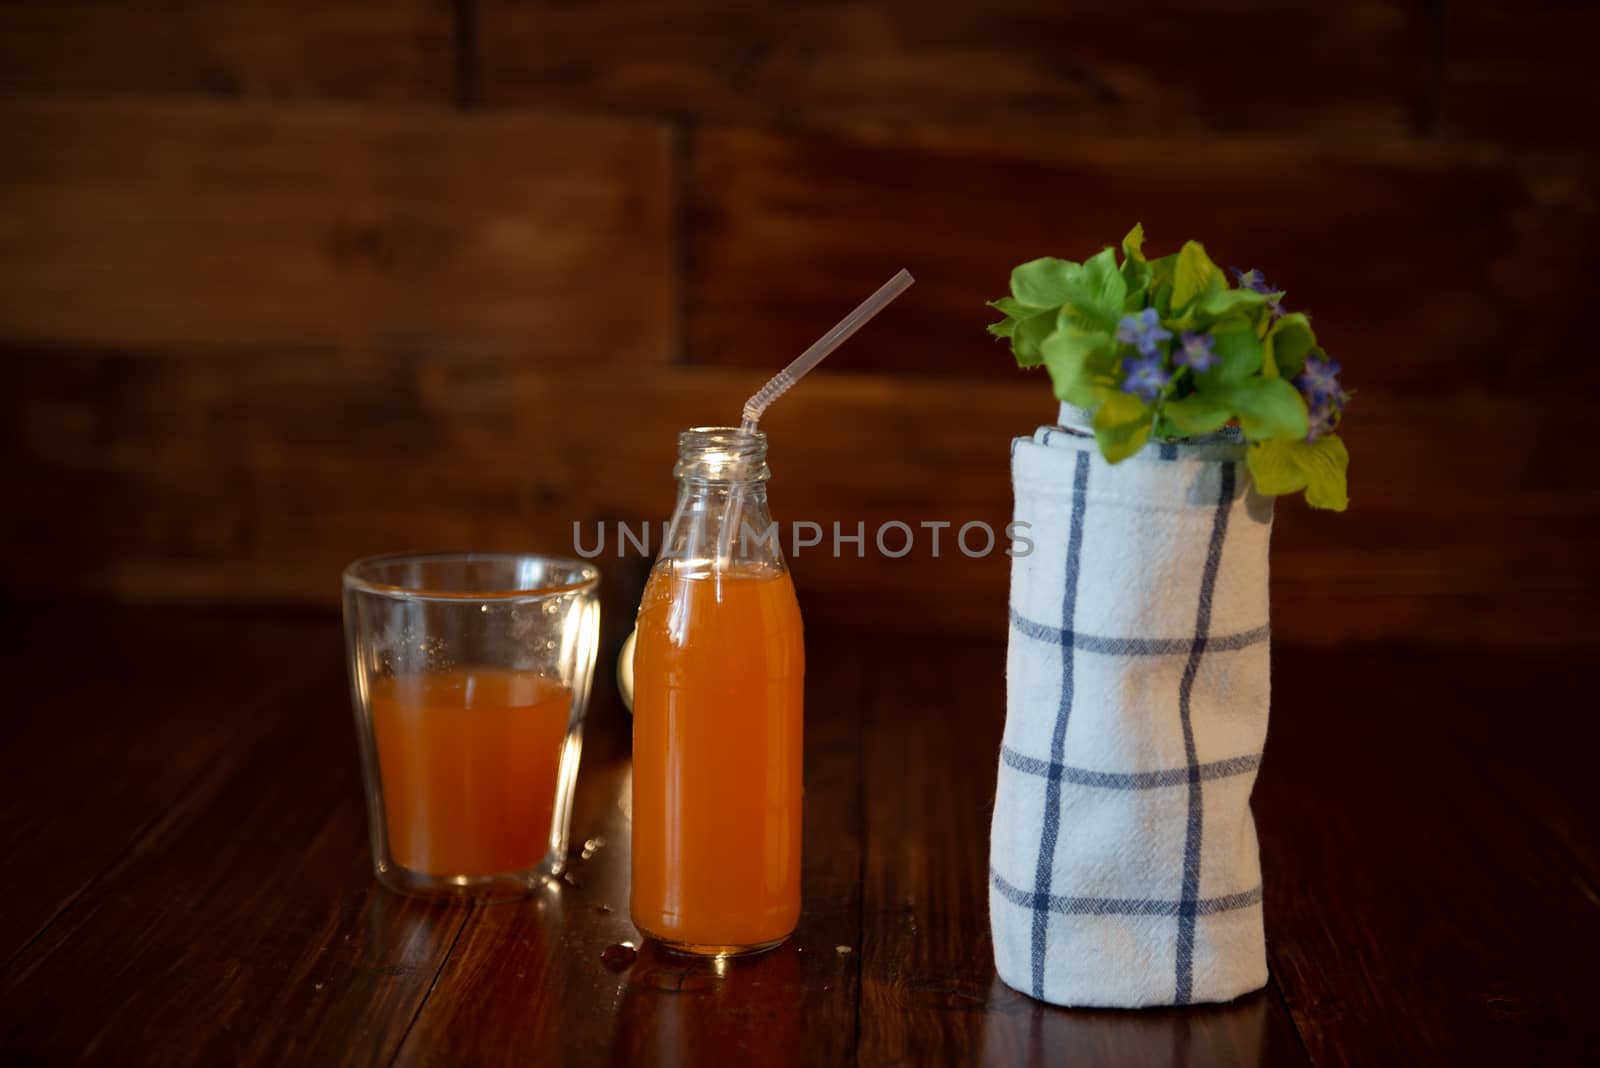 vintage bottle with juice, straw, flowers and towel on wooden table.